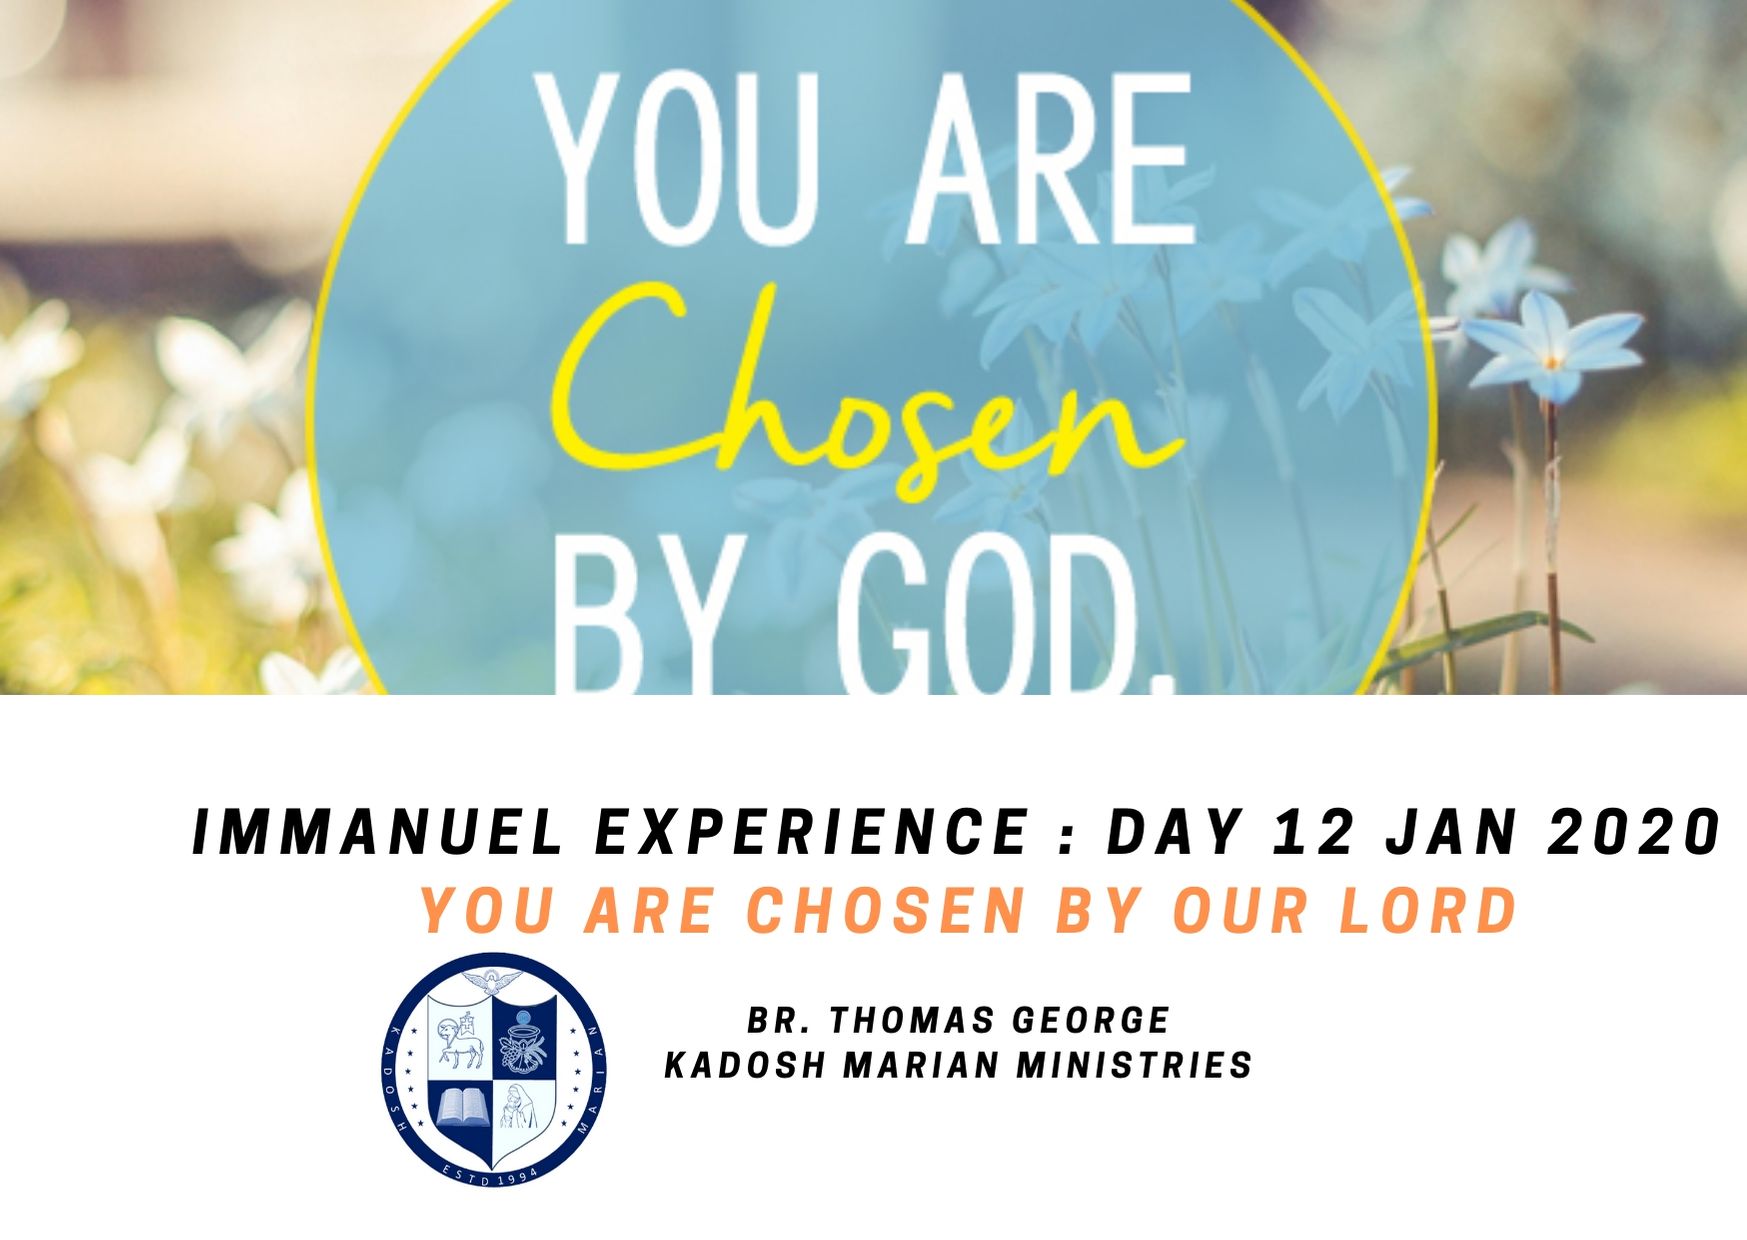 Immanuel Experience : Day 14 Jan 2020 – You are chosen by God